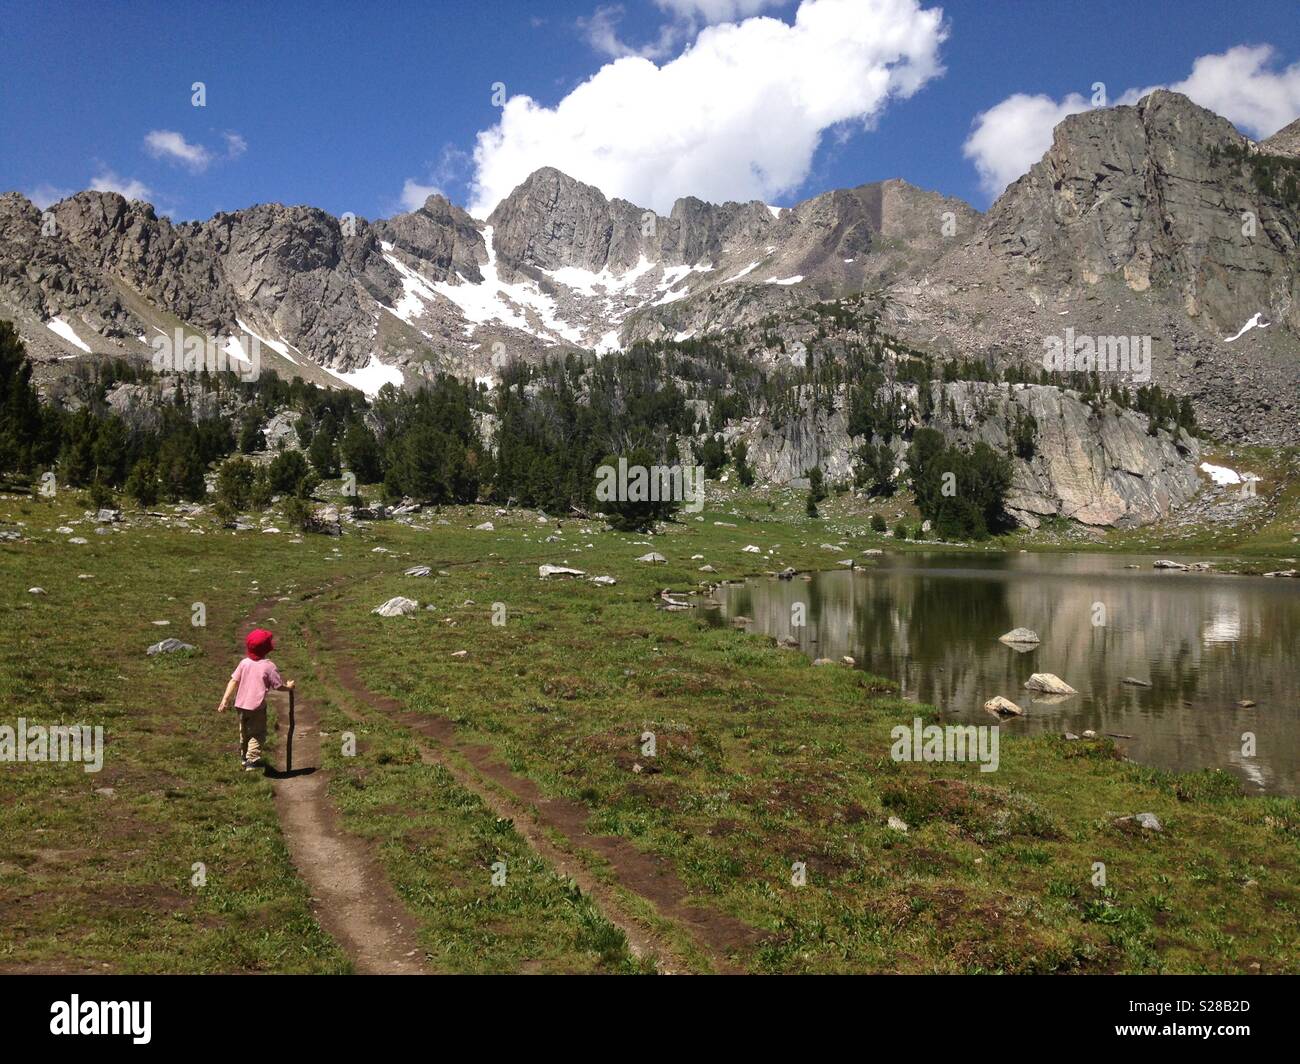 Young child hiking in mountains walking past a mountain lake Stock Photo